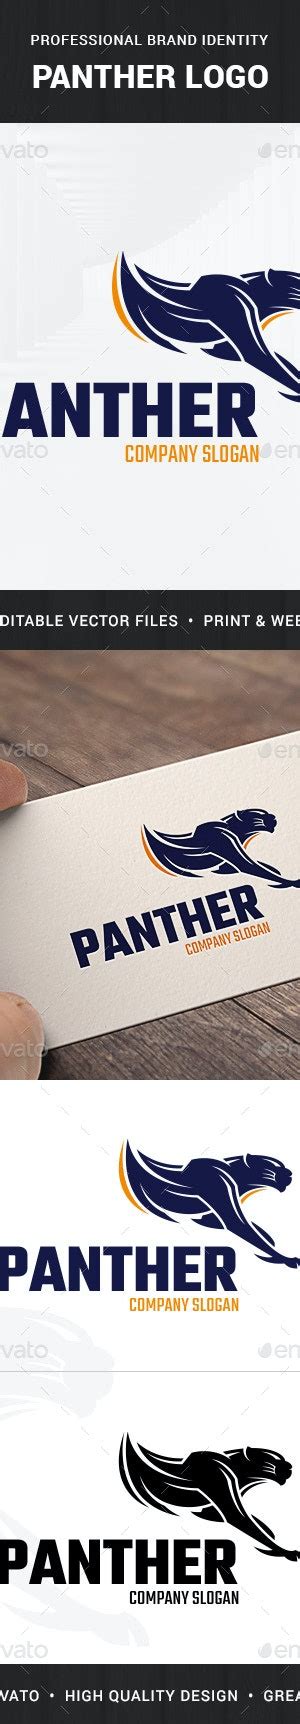 Panther Logo Template By Liveatthebbq Graphicriver